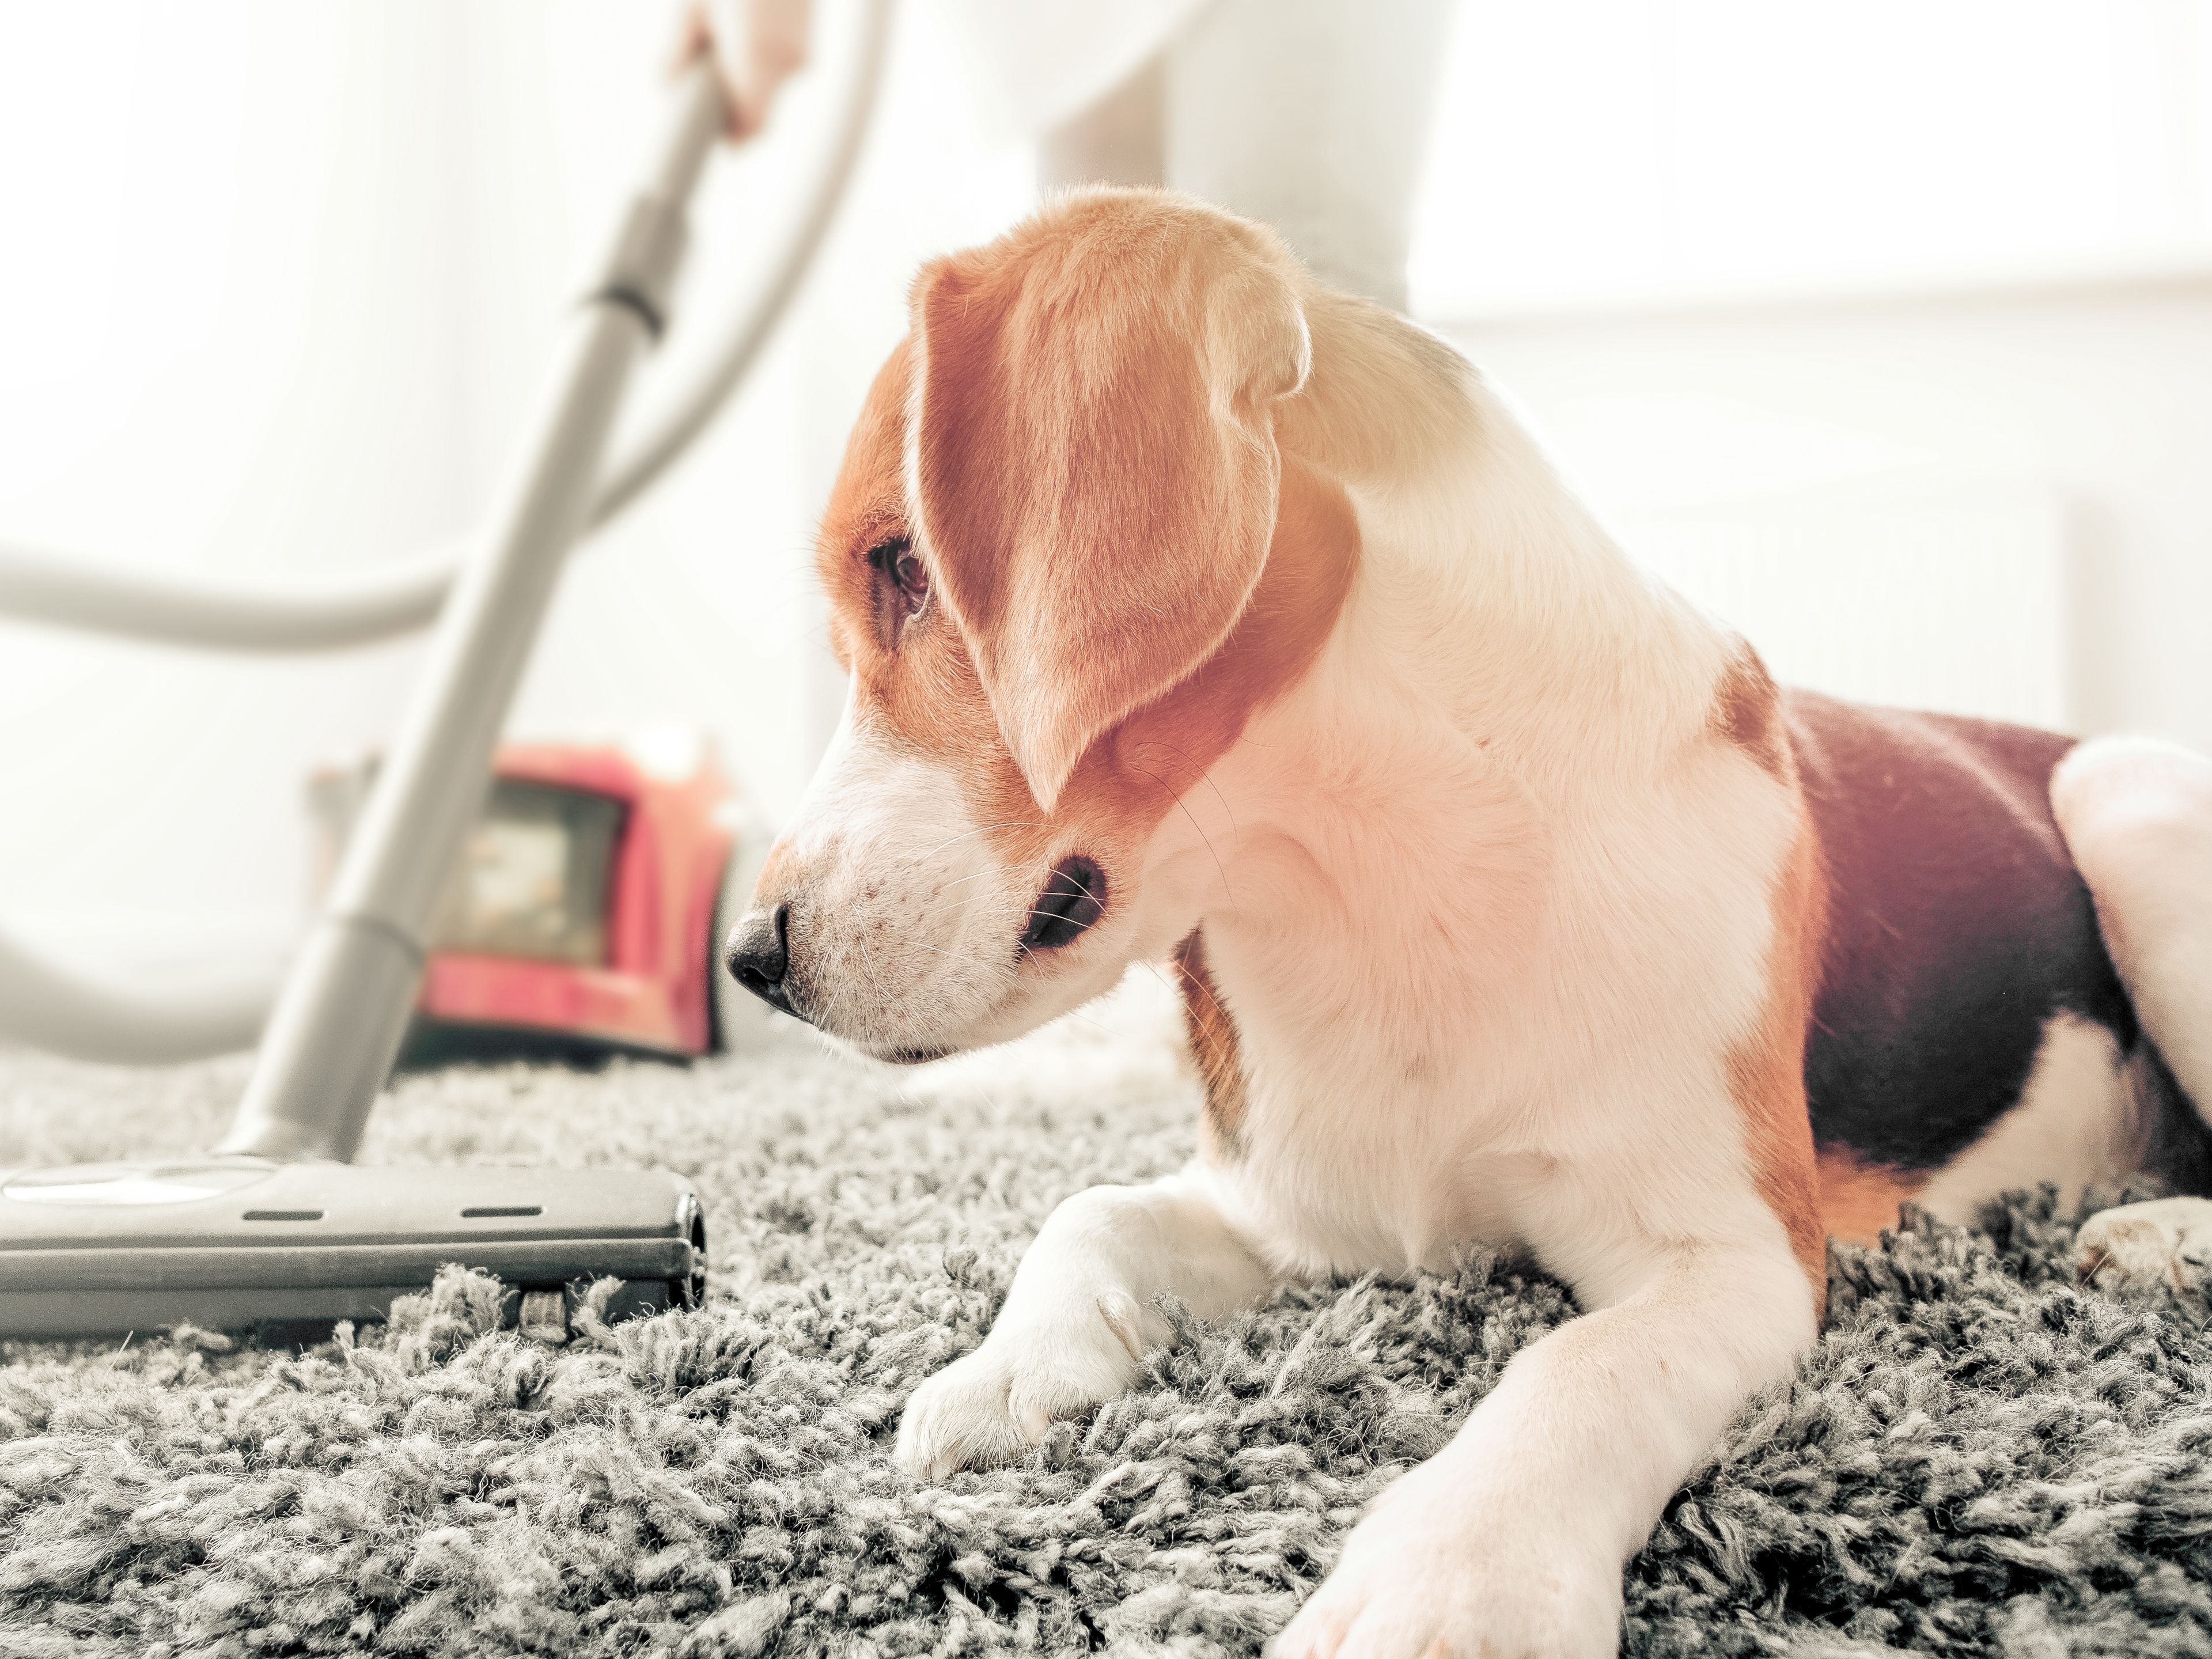 Beagle puppy lying down on a rug next to a vacuum